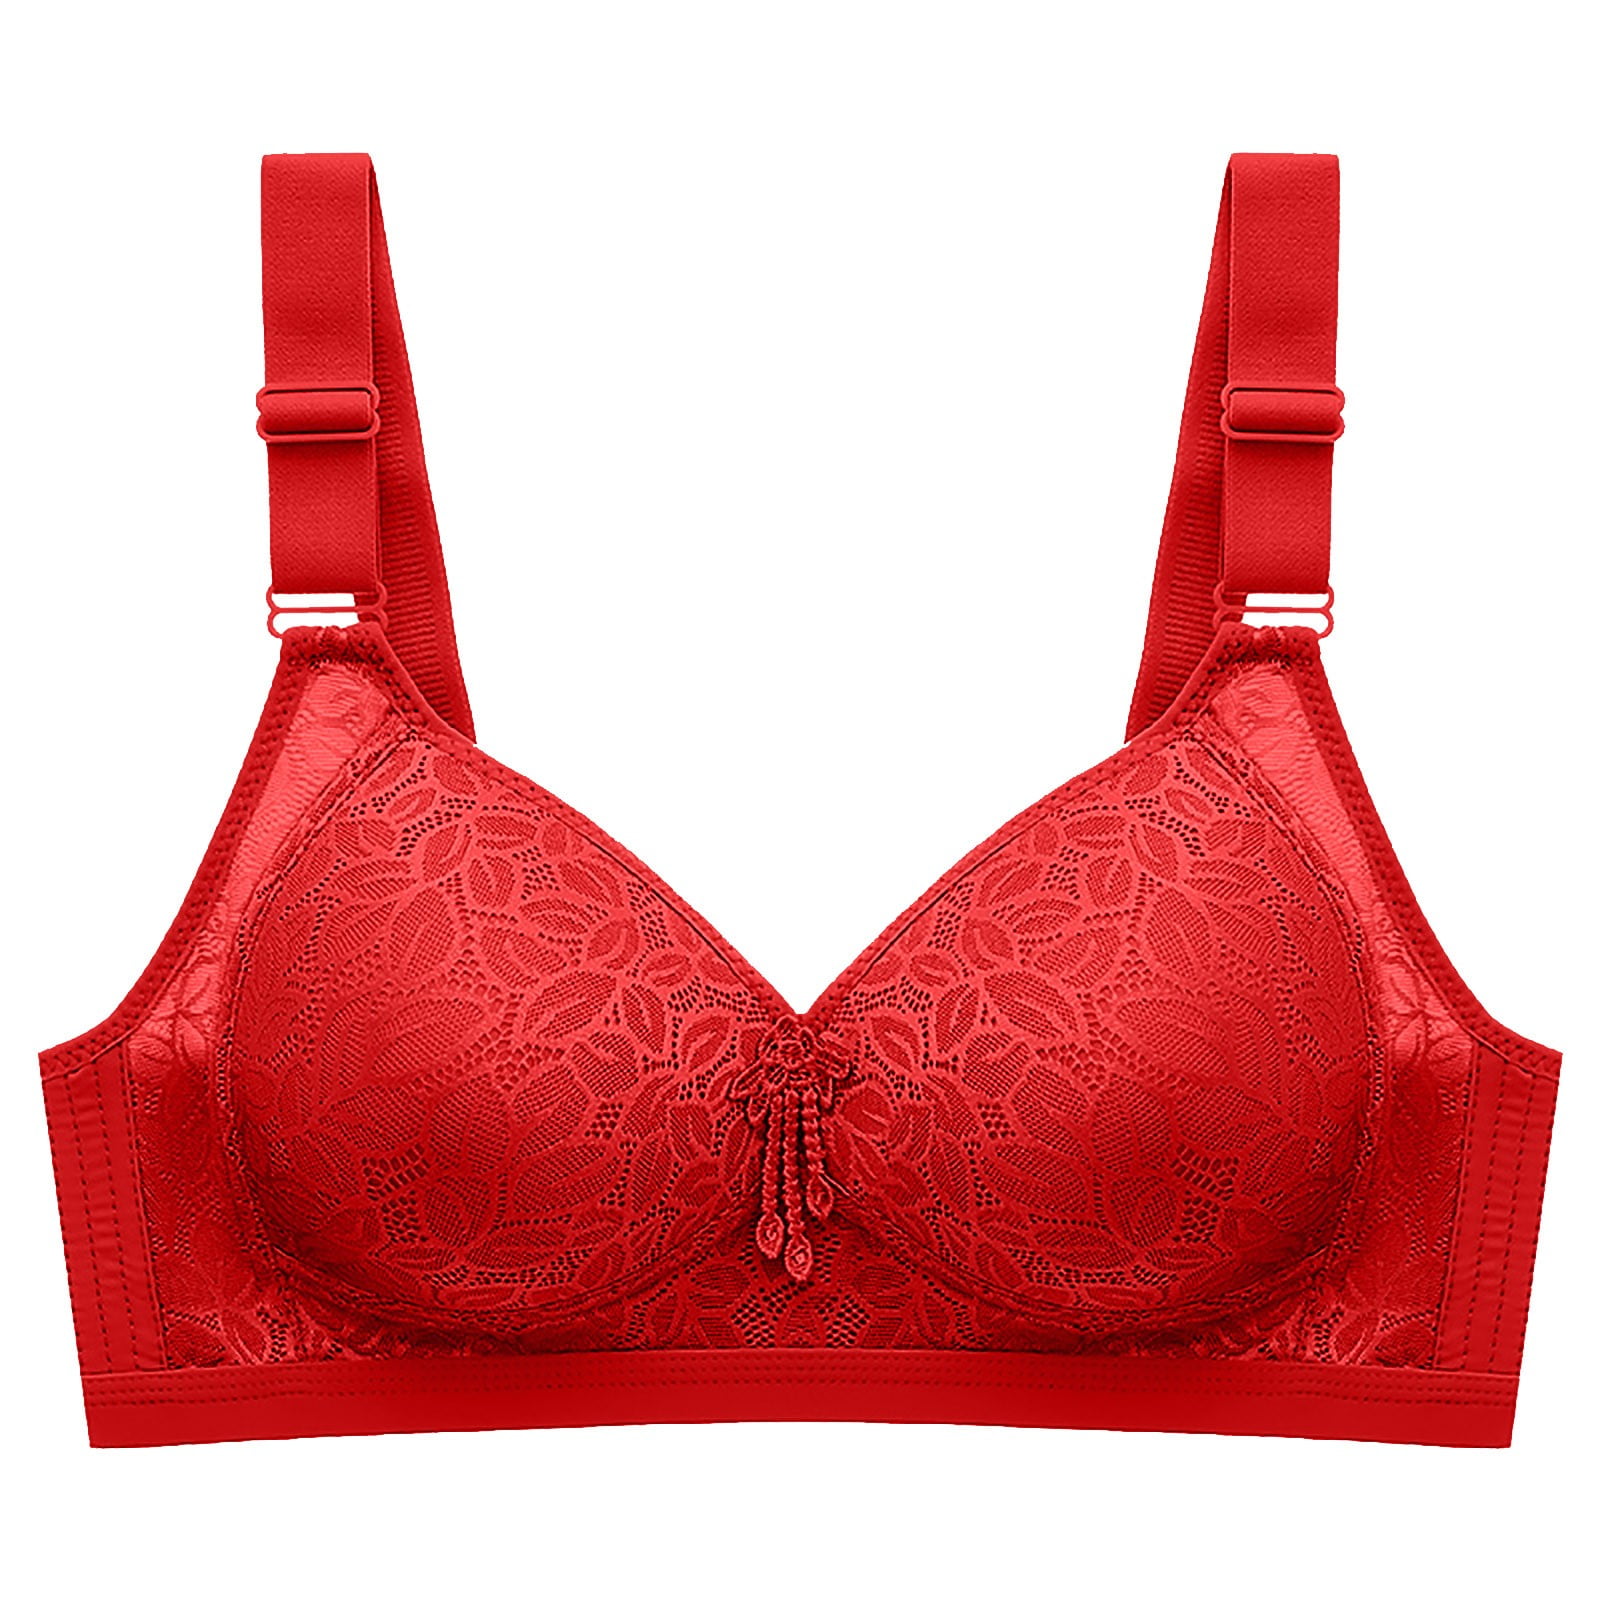 CAICJ98 Lingerie for Women Plus Size Women's Plus Size Minimizer Bra for L  Bust Full Coverage Figure Non Padded Wirefree Red,48